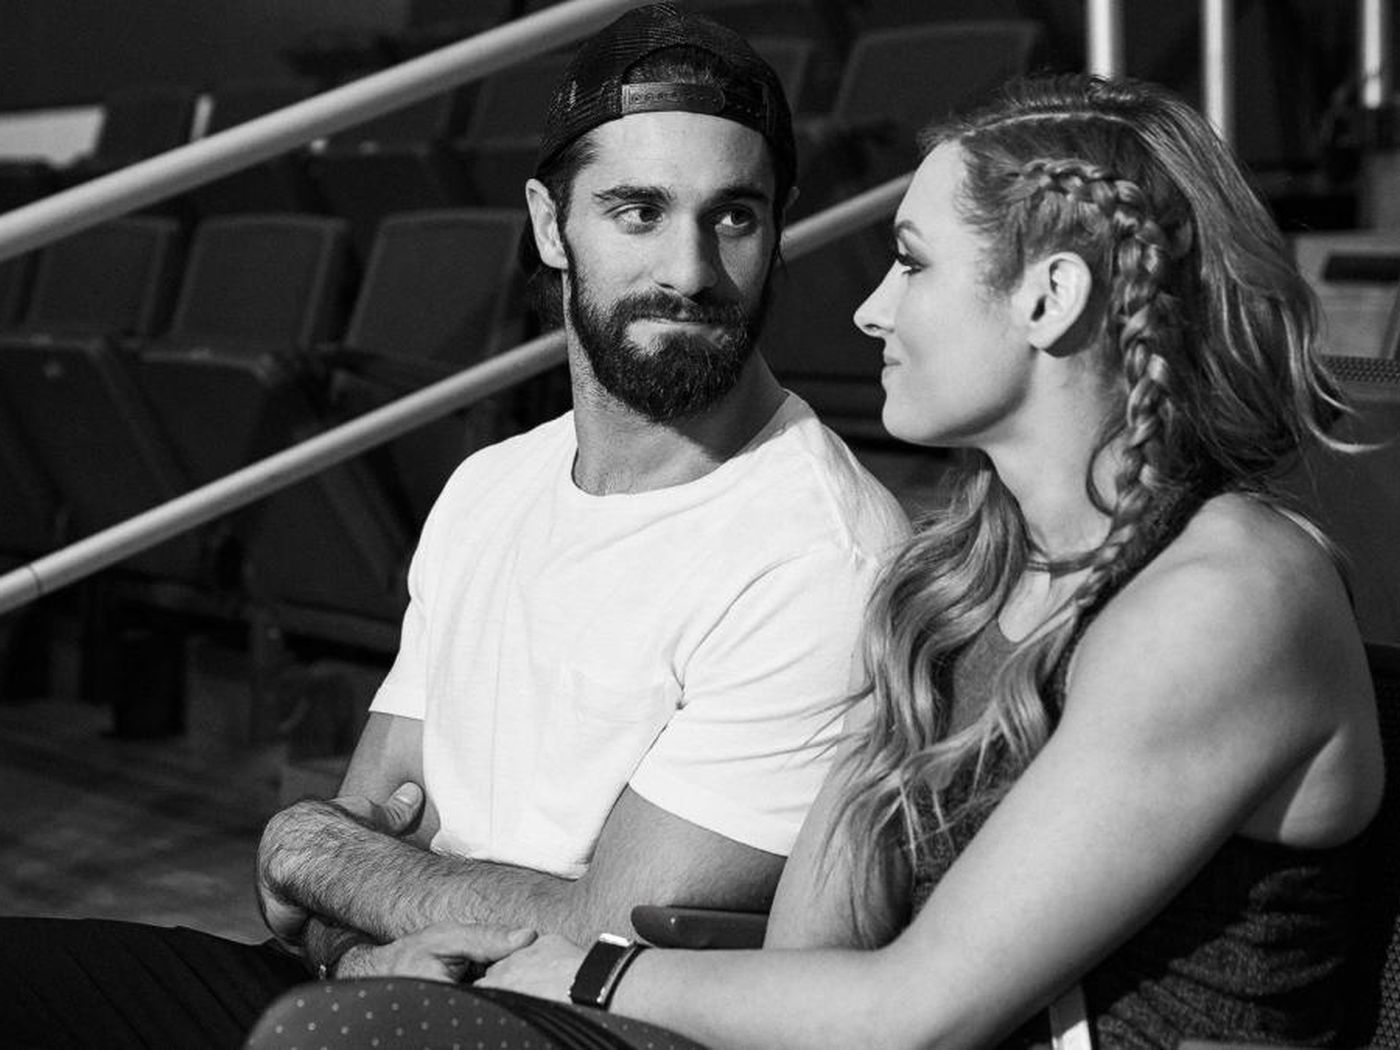 How Becky Lynch & Seth Rollins are handling their #StayAtHome time